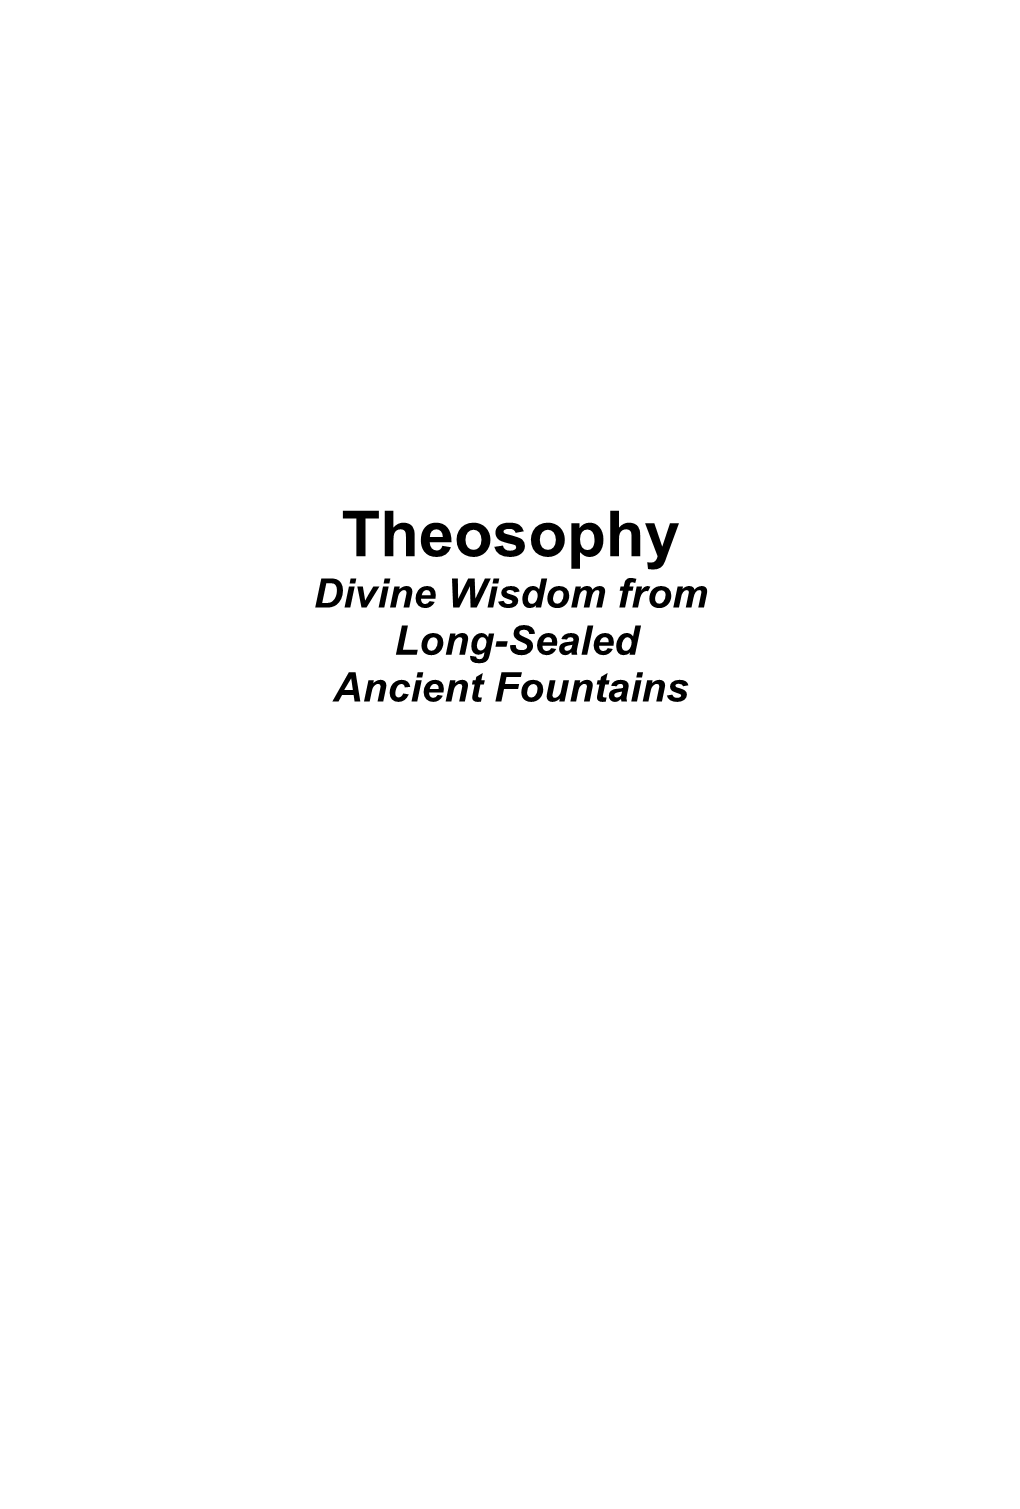 Theosophy: Divine Wisdom from Long Sealed Ancient Fountains